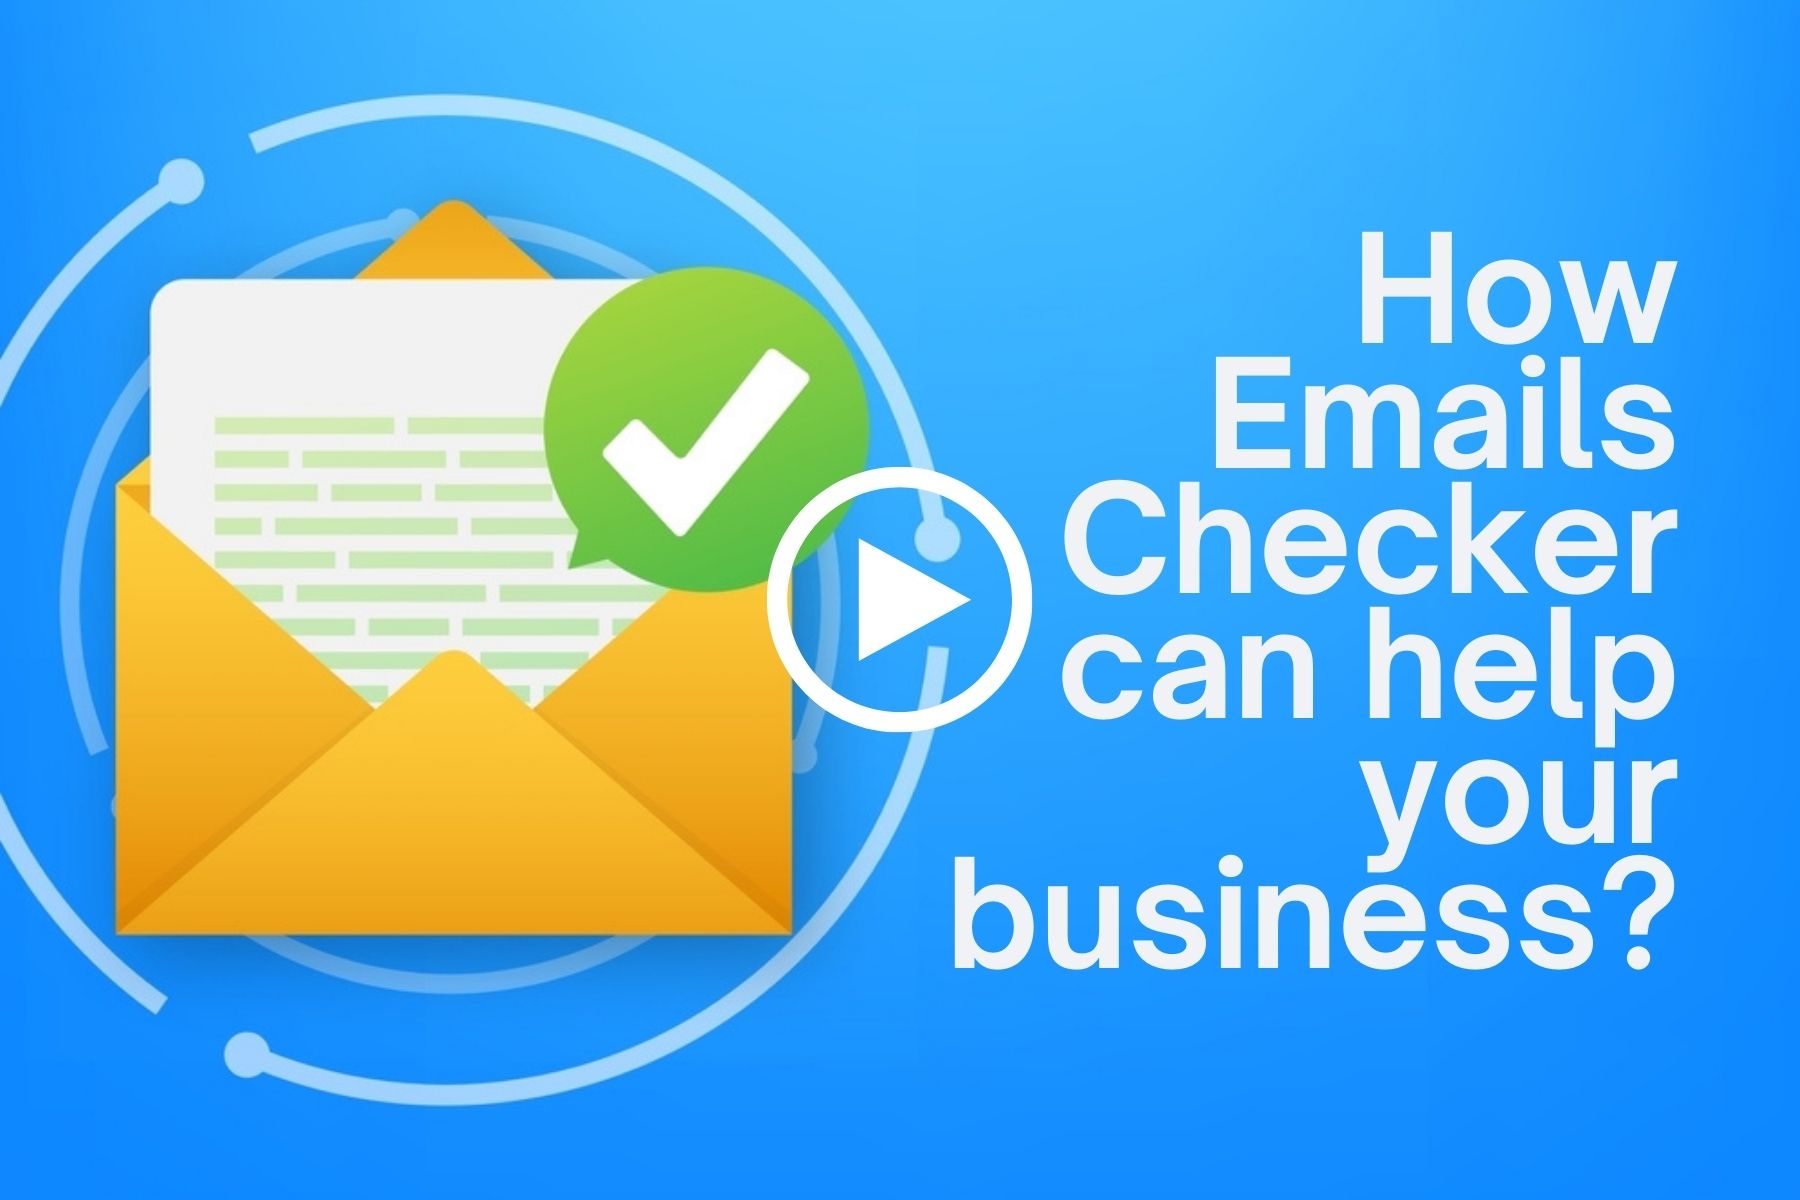 How Emails Checker can help your business?